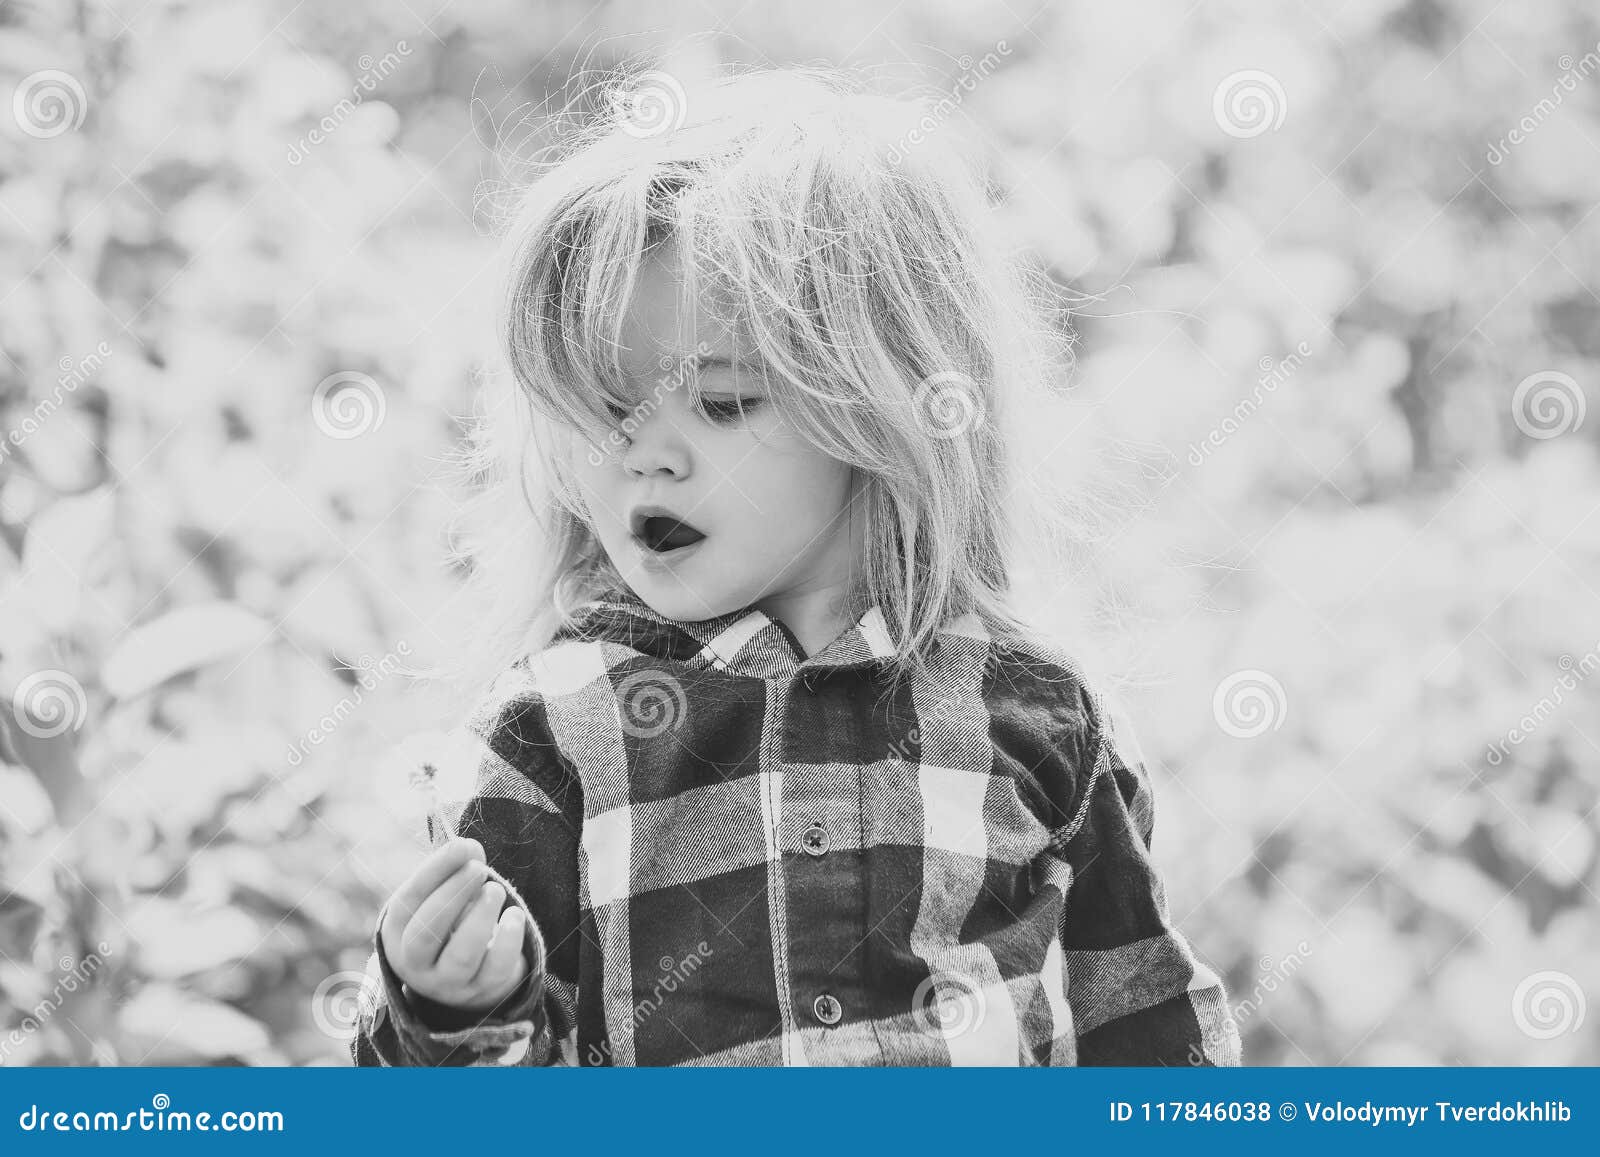 little girl face portrait in your advertisnent. freedom, activity, discovery